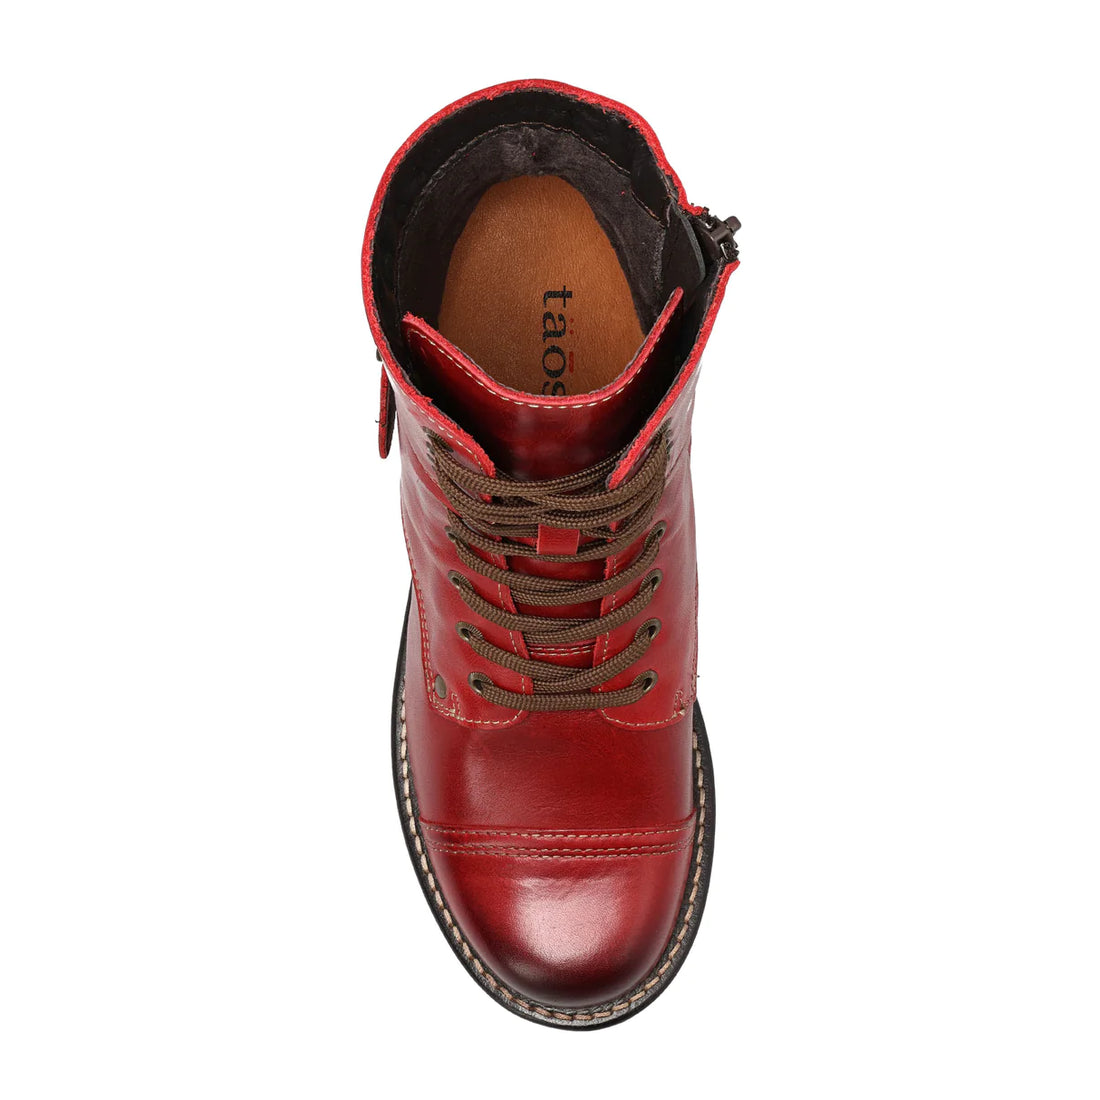 WOMEN'S TAOS CRAVE BOOT | RED